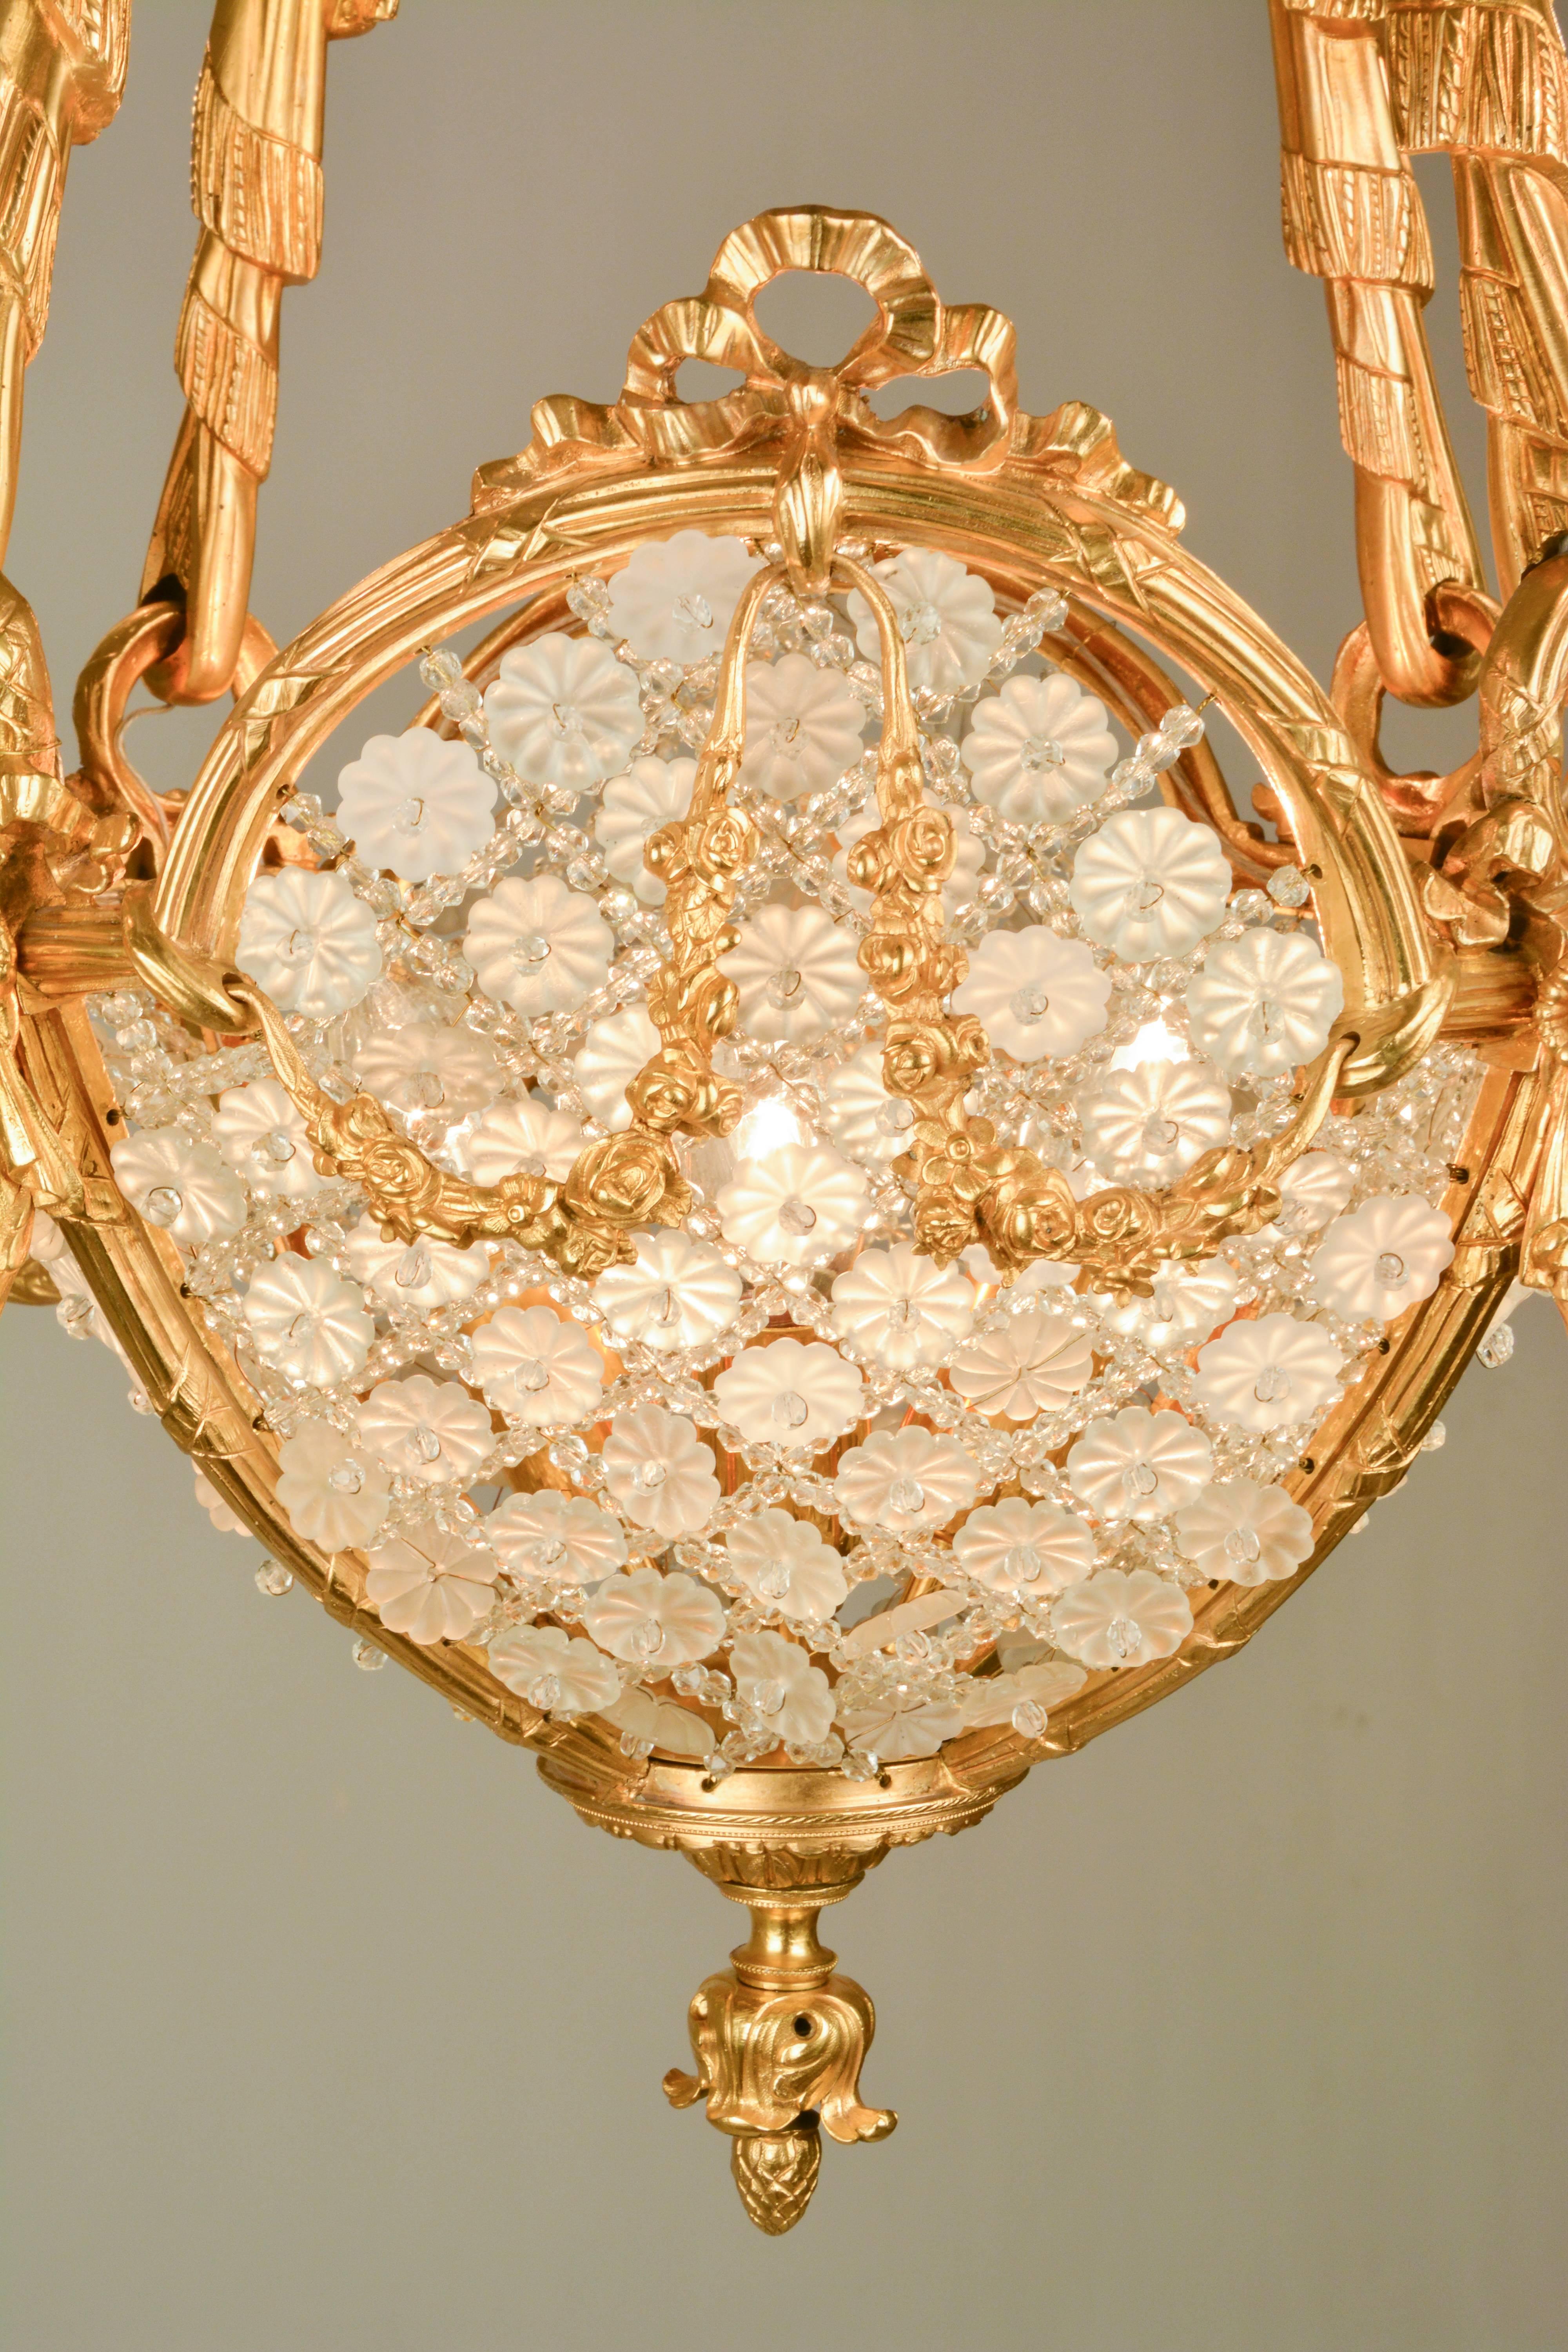 Romantic Fin De Siecle Pendant Lamp In Excellent Condition For Sale In Vienna, AT